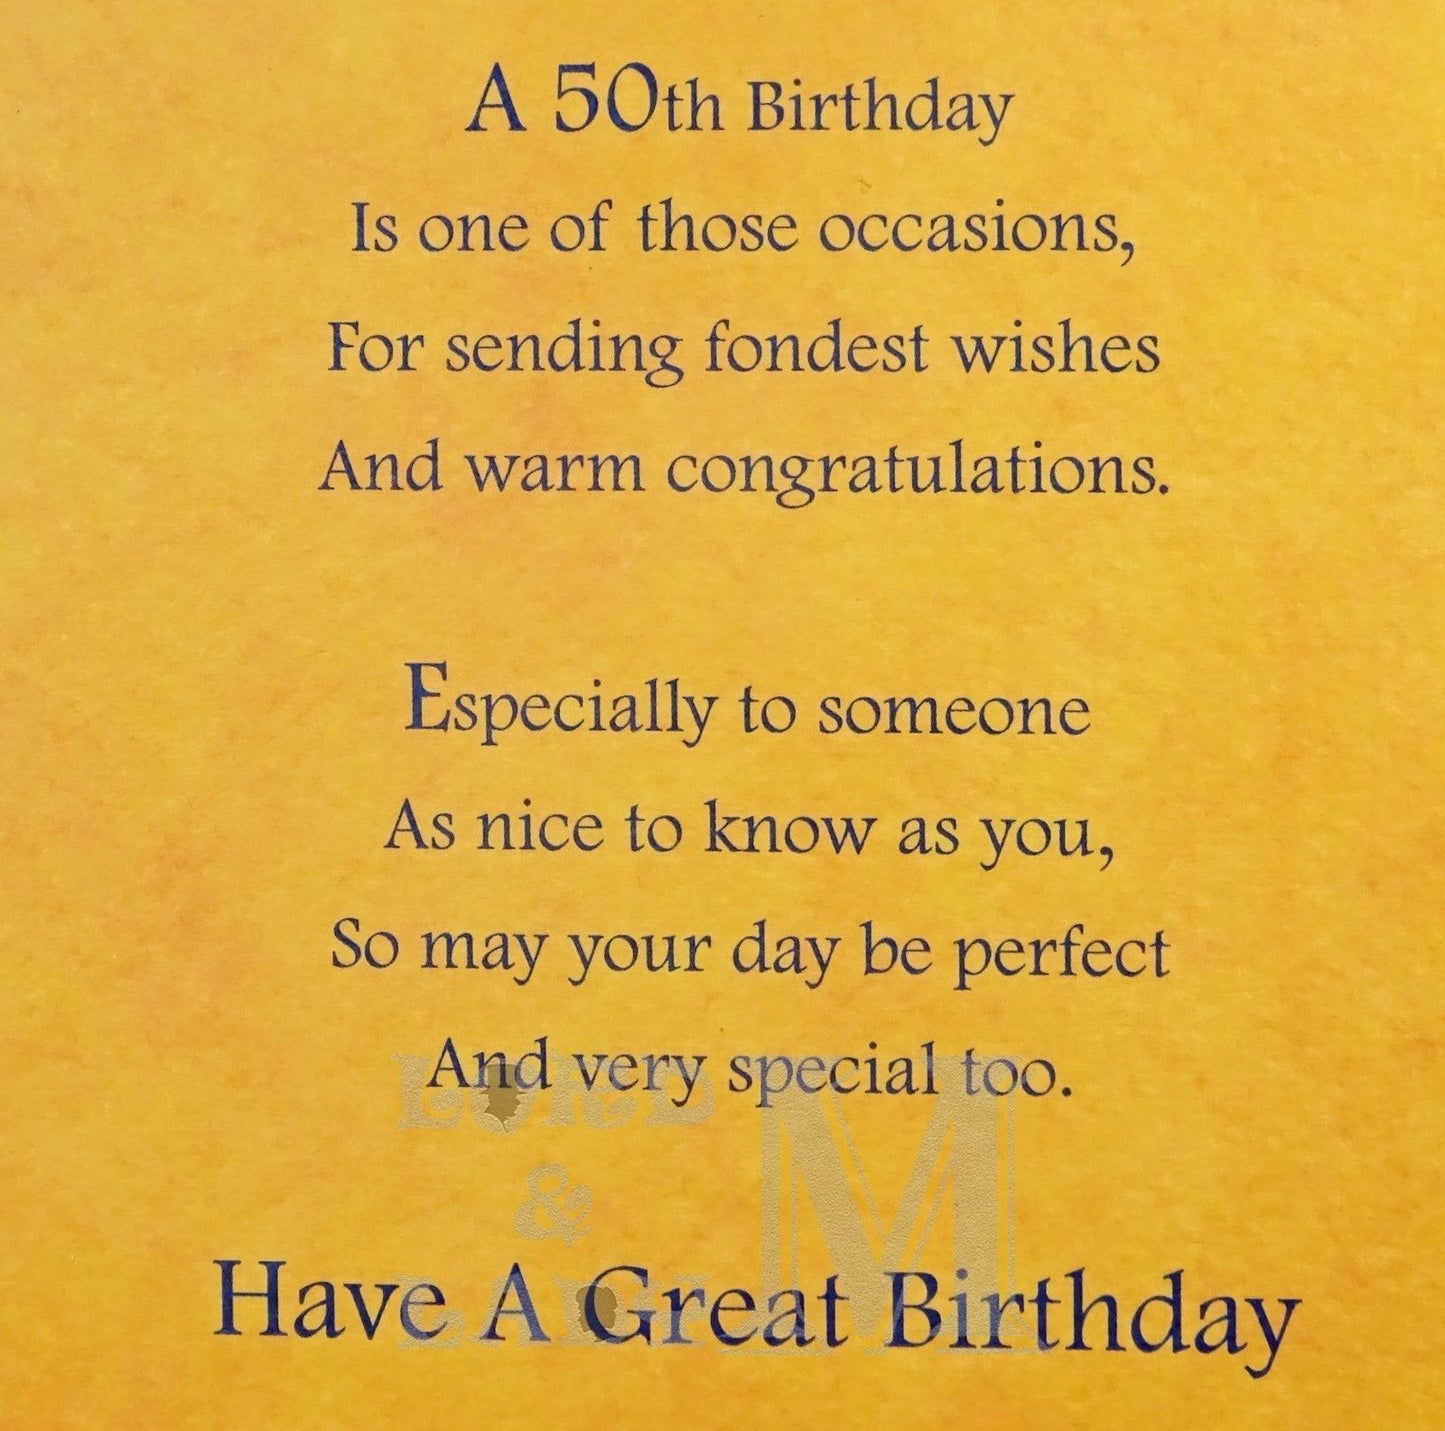 23cm - 50 Birthday Wishes - Real Ale - CWH